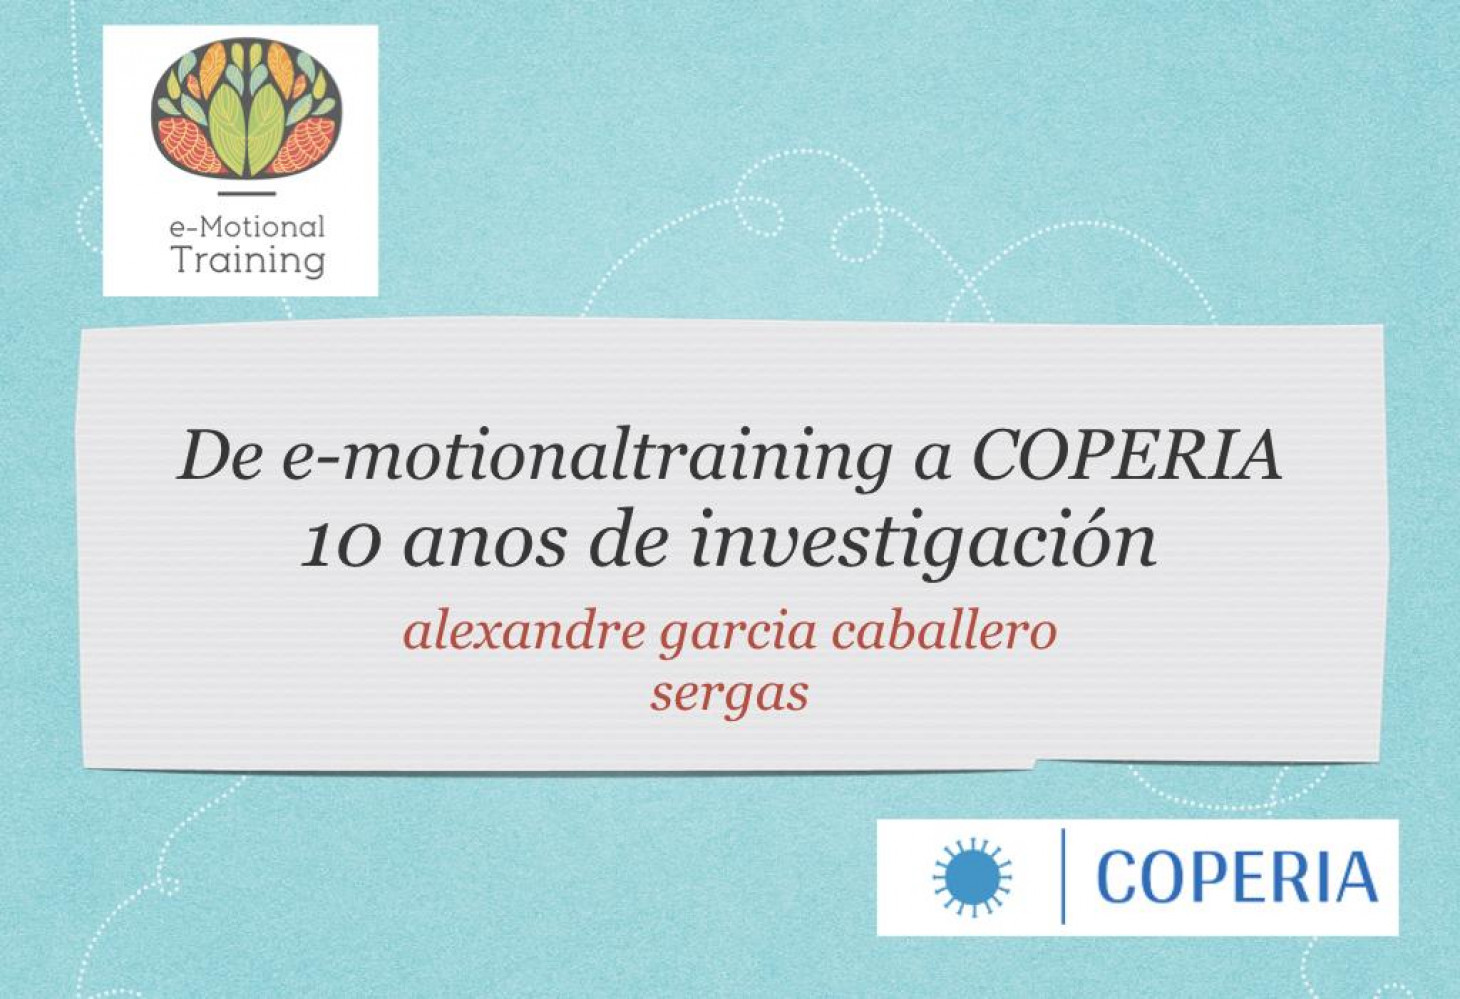 Alexandre García Caballero - From e-motional training to Coperia. 10 years of research.